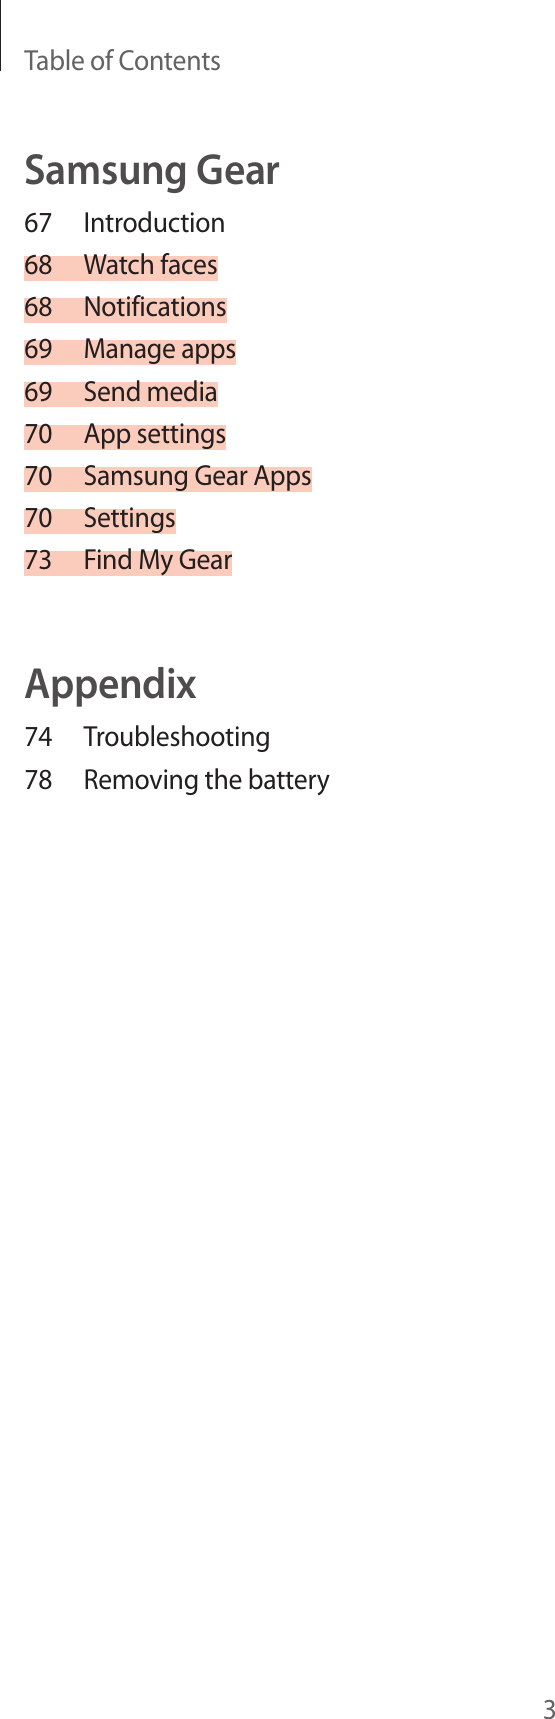 Table of Contents3Samsung Gear67 Introduction68  Watch faces68 Notifications69  Manage apps69  Send media70  App settings70  Samsung Gear Apps70 Settings73  Find My GearAppendix74 Troubleshooting78  Removing the battery